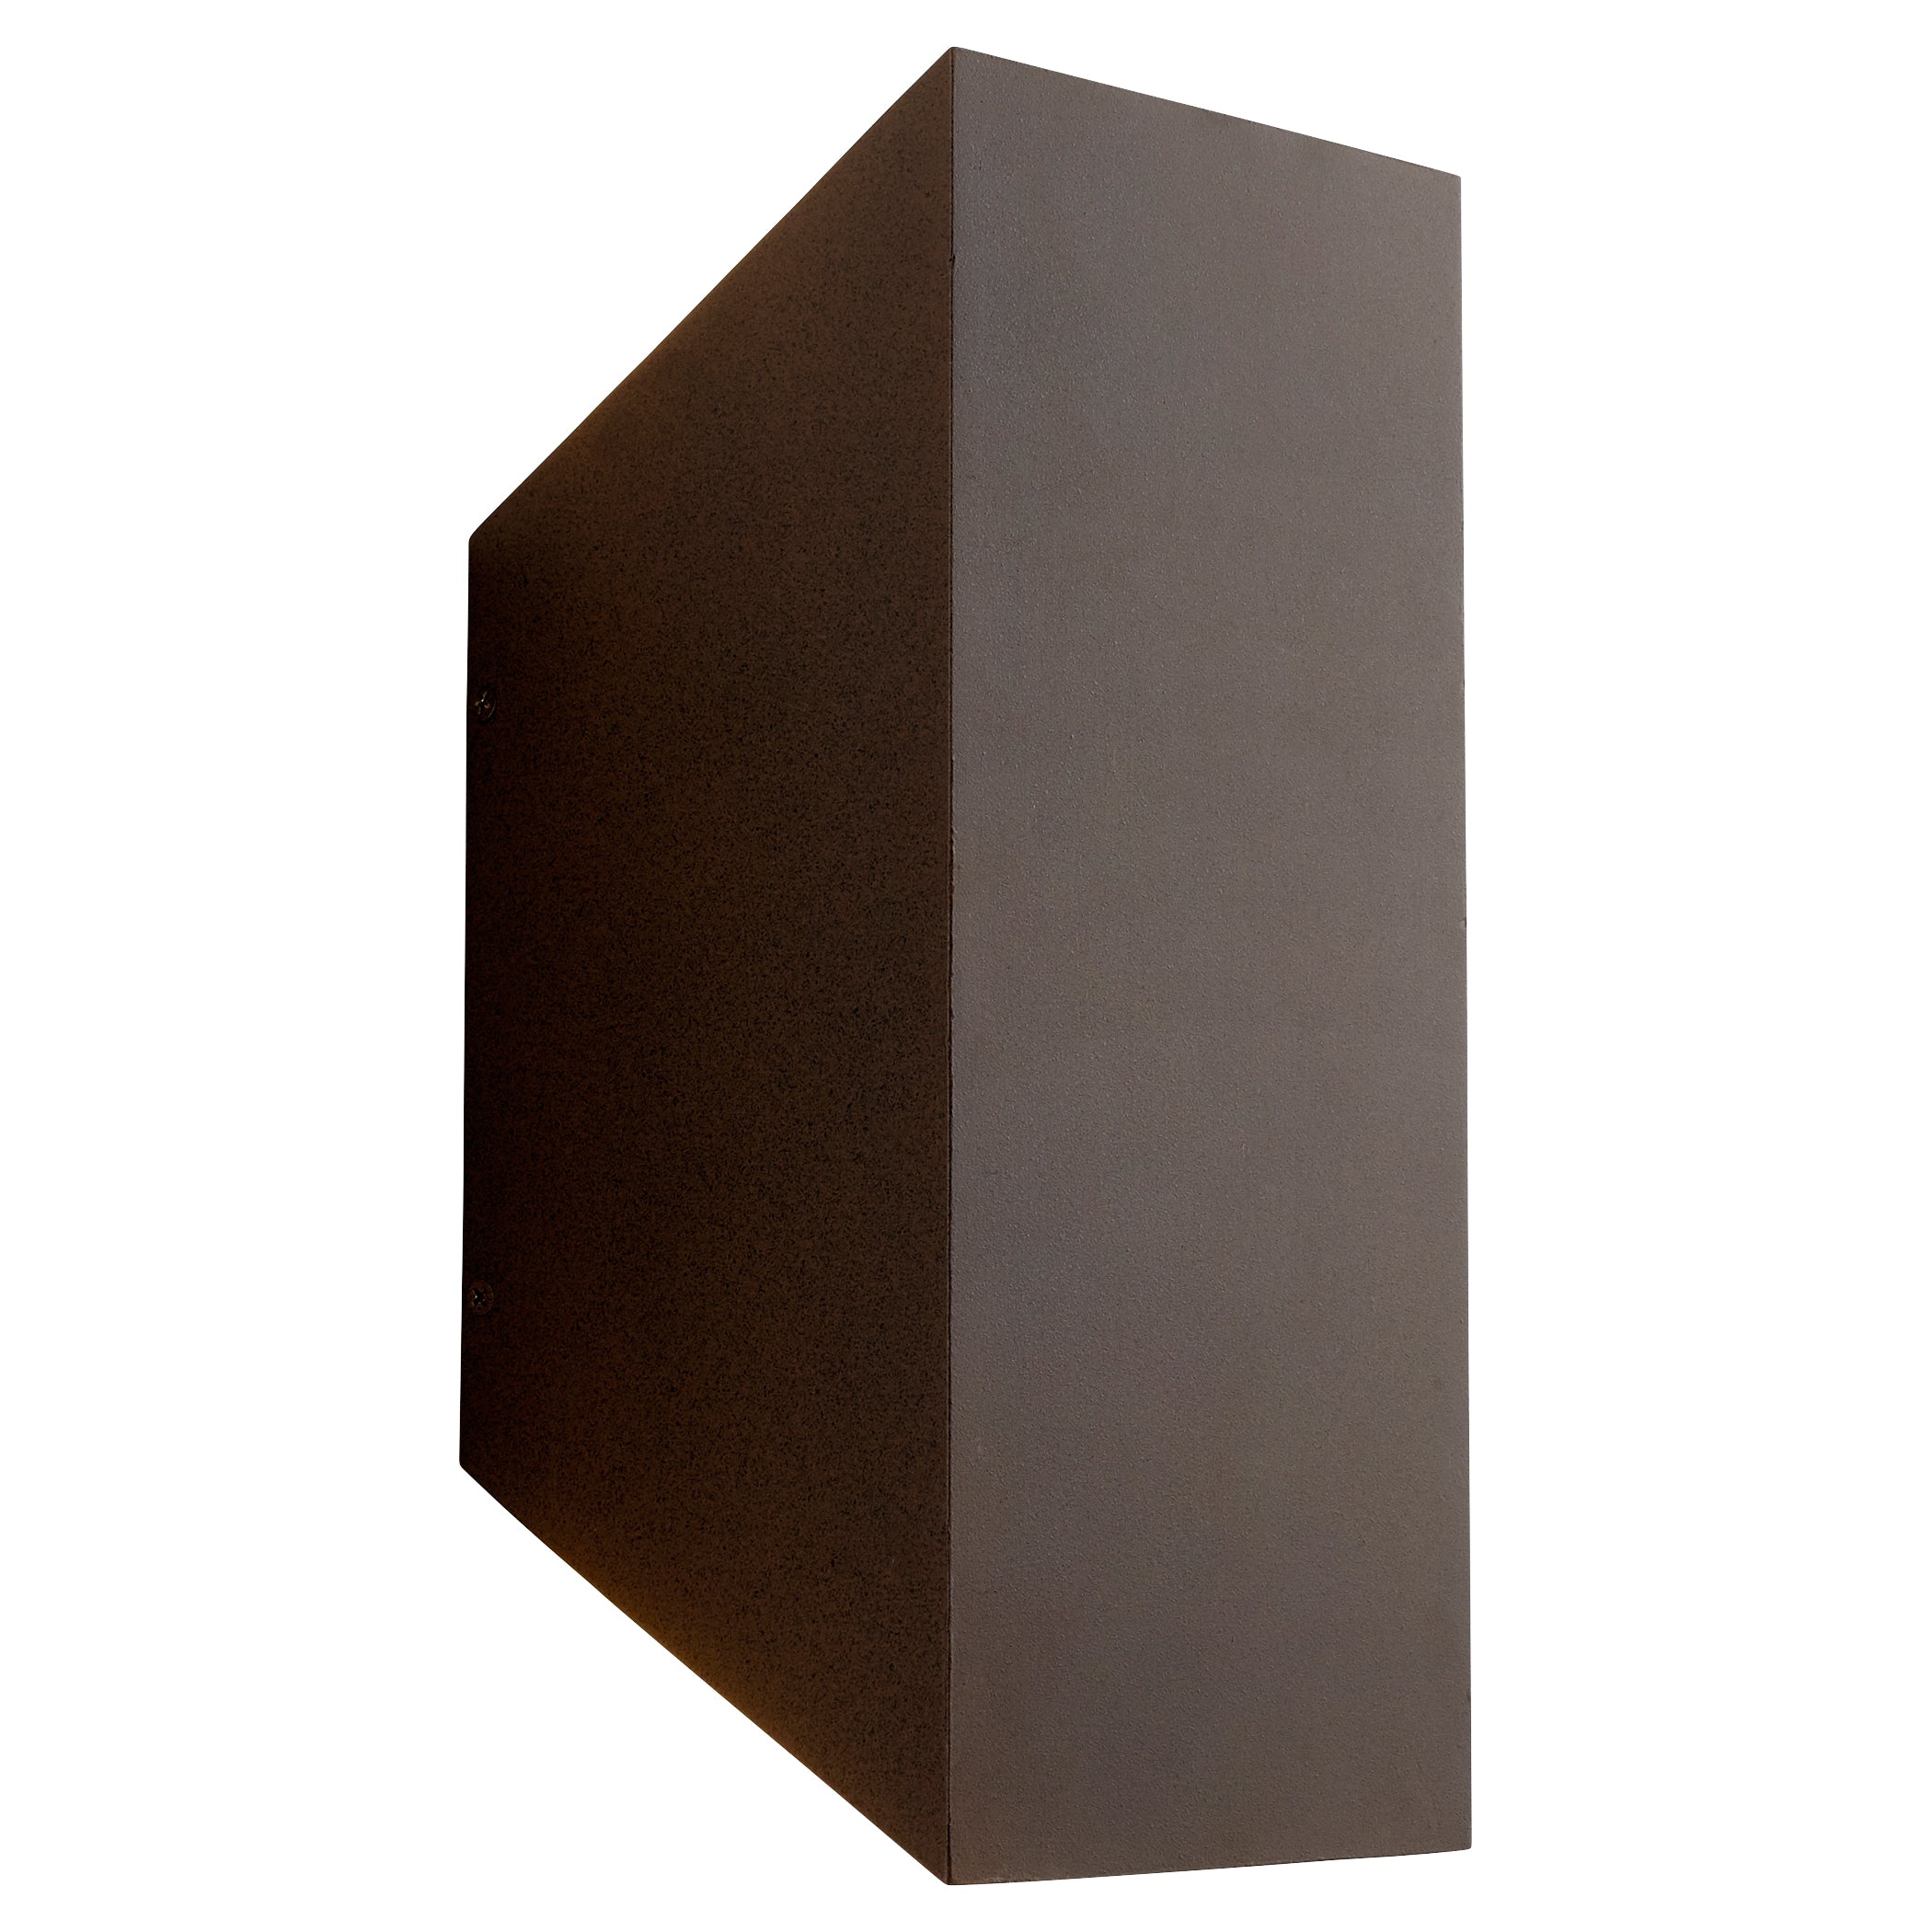 Oxygen Duo 3-703-22 Outdoor Wall Sconce Light - Oiled Bronze